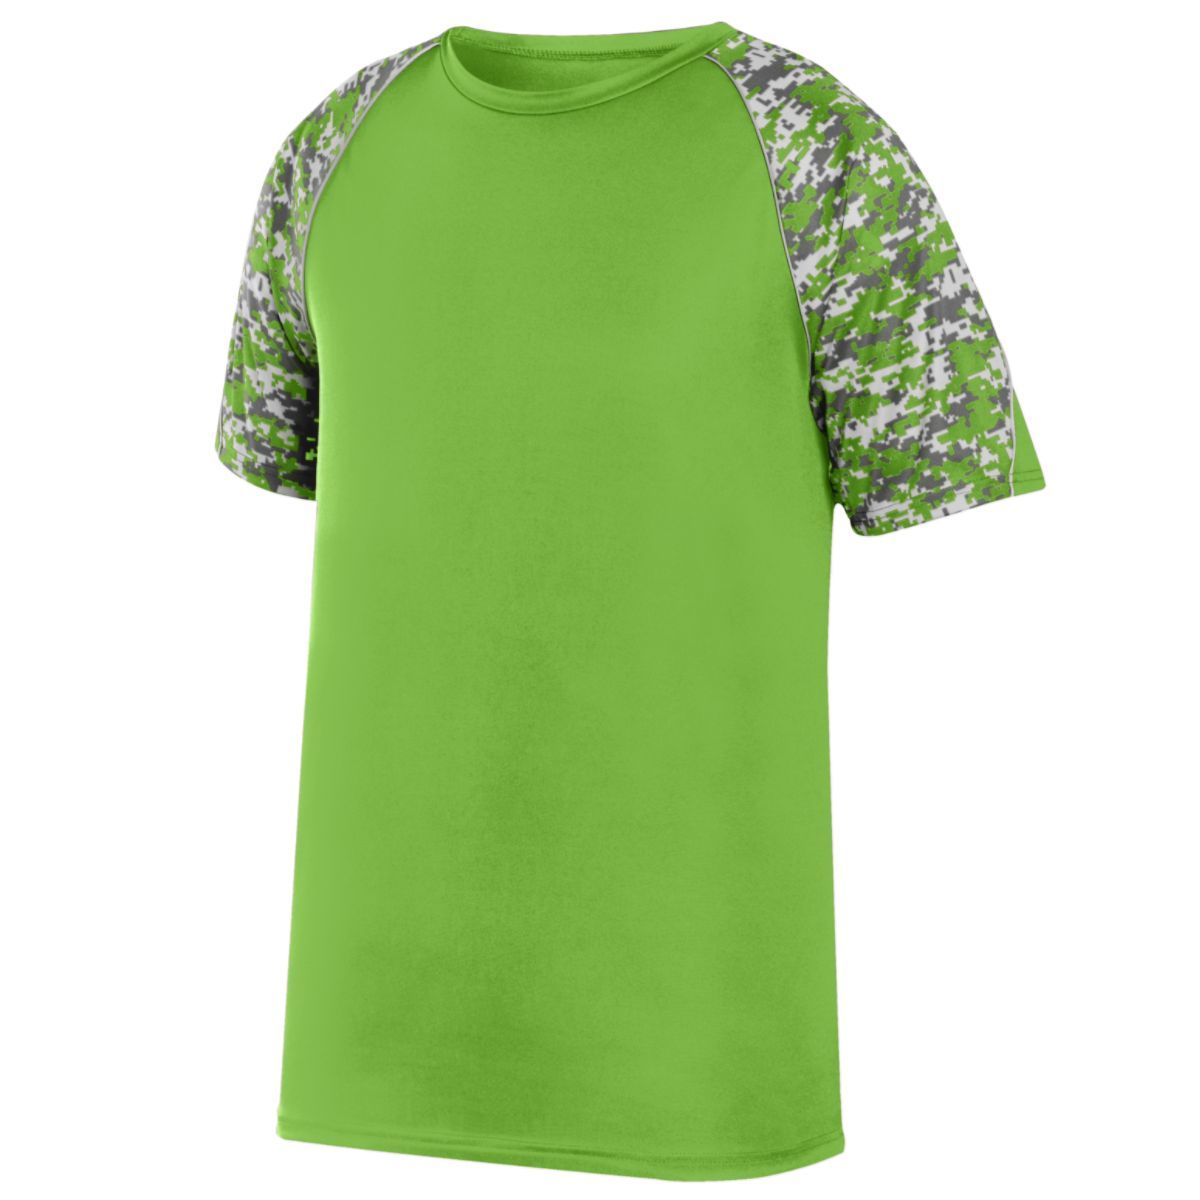 Augusta Sportswear Color Block Digi Camo Jersey in Lime/Lime Digi/Silver  -Part of the Adult, Adult-Jersey, Augusta-Products, Baseball, Shirts, All-Sports, All-Sports-1 product lines at KanaleyCreations.com